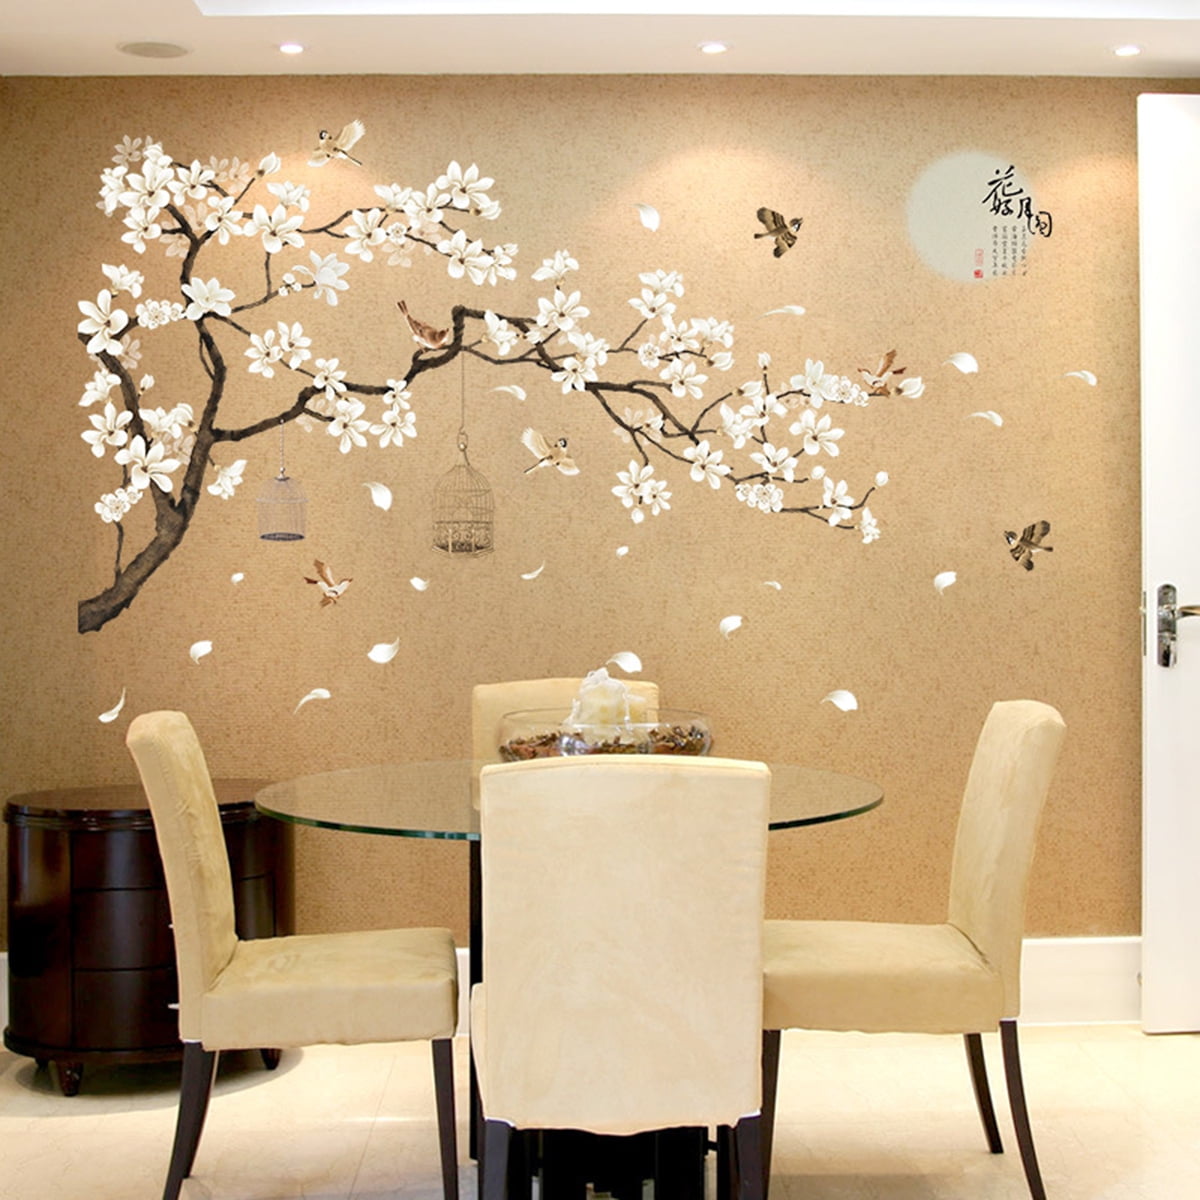 Family Tree Removable Wall Sticker Vinyl Decal Home Decor Art Mural Branch Photo 